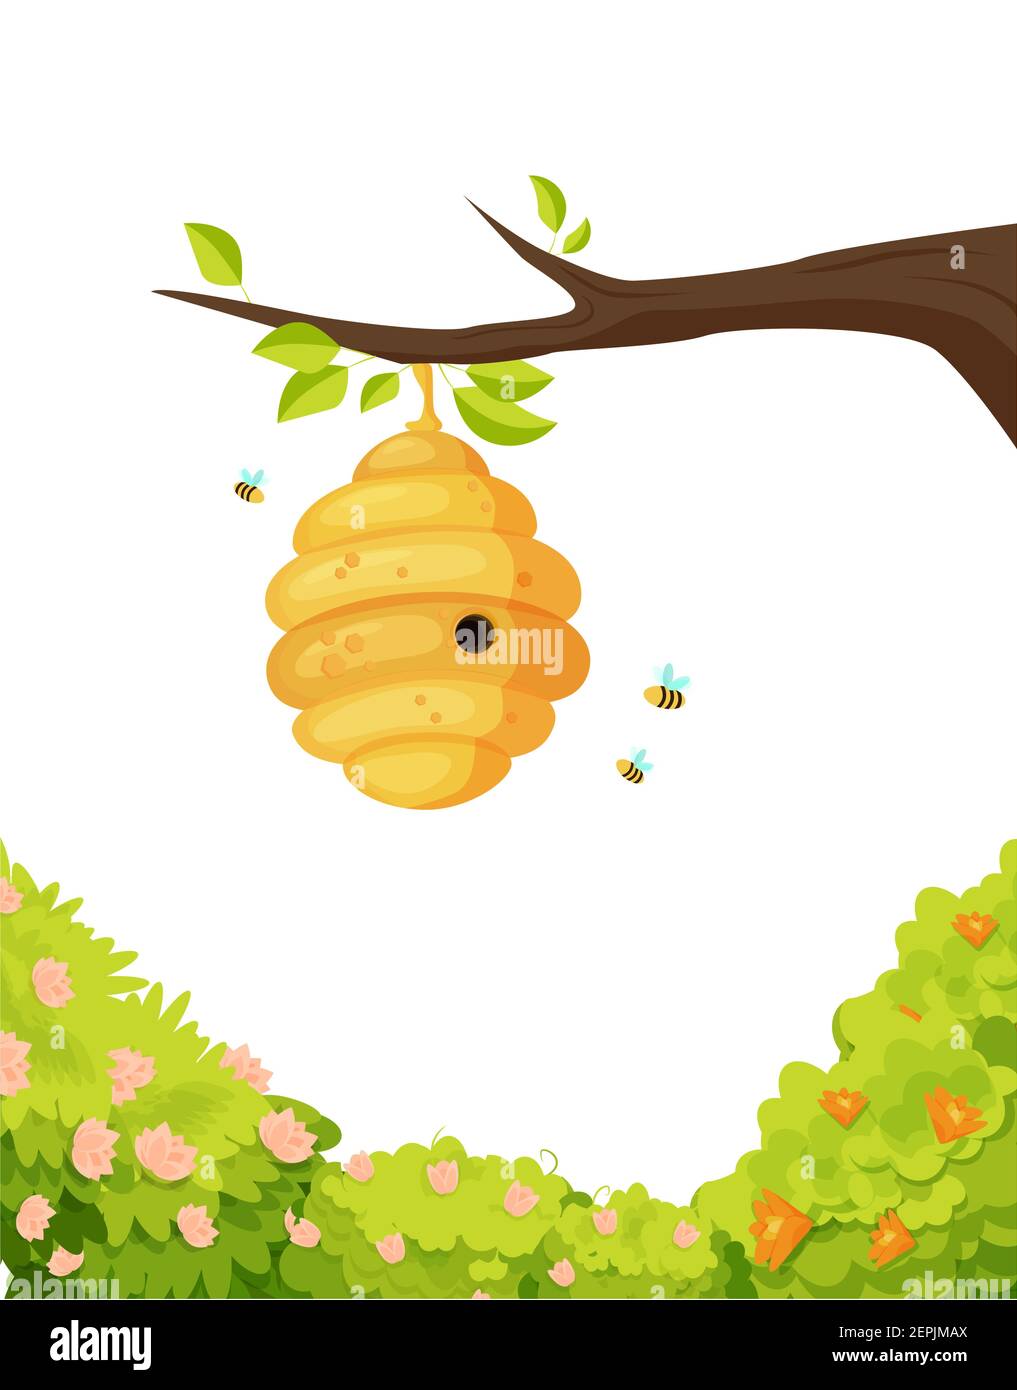 Beehive on branch with swirling bees illustration. Yellow cocoon covered with sweet honey surrounded by flowering trees. Stock Vector